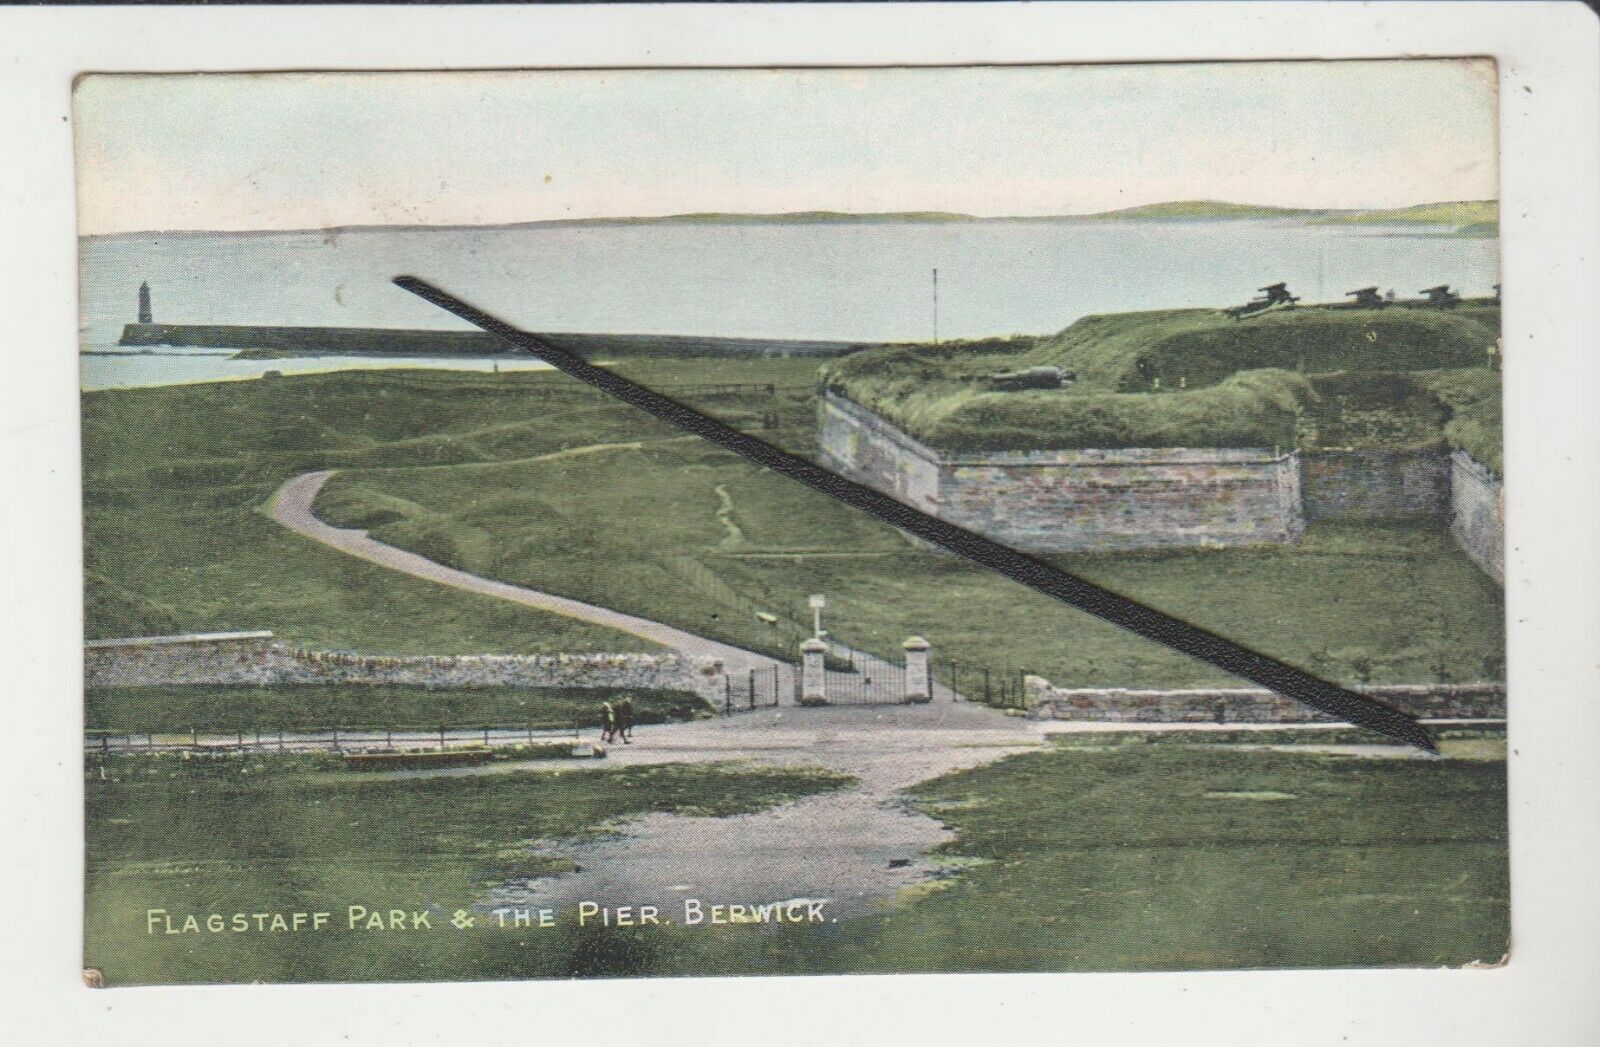 House Clearance - POSTCARD ; FLAGSTAFF PARK & THE PIER BRWICK -  TO BAYLES P/M KELSO 1907